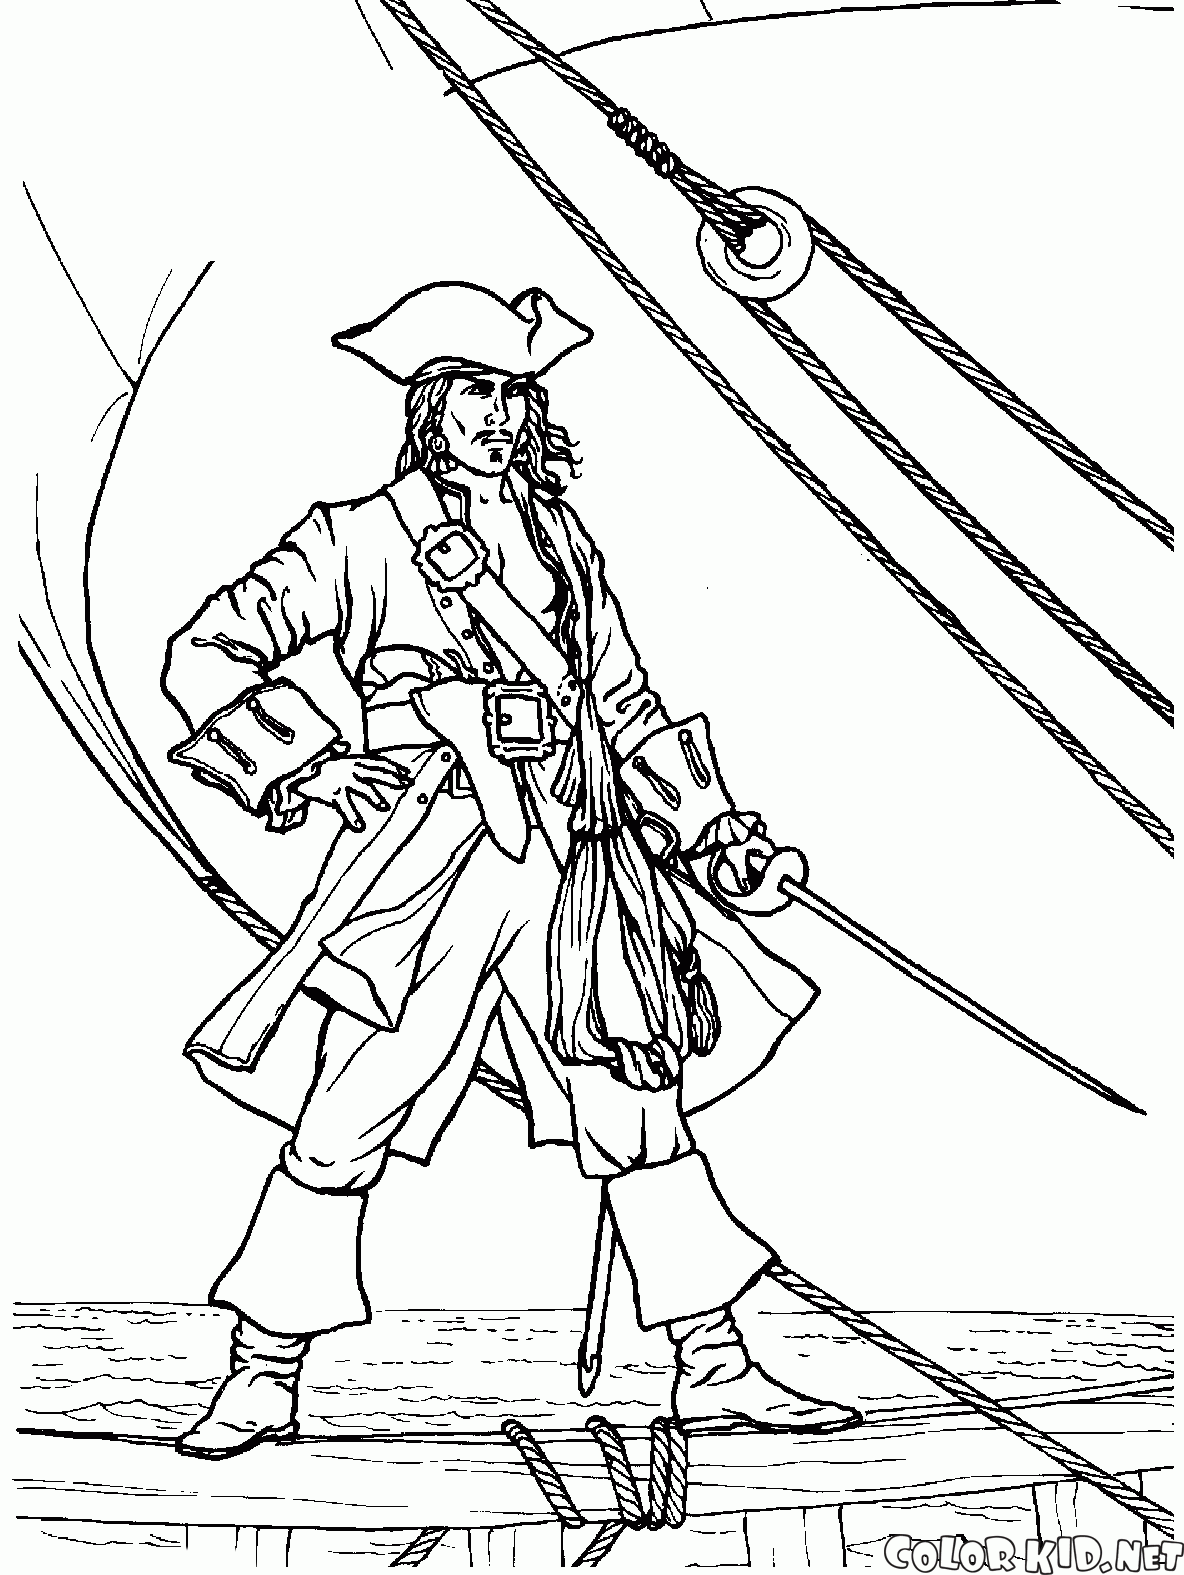 Coloring page - Pirates